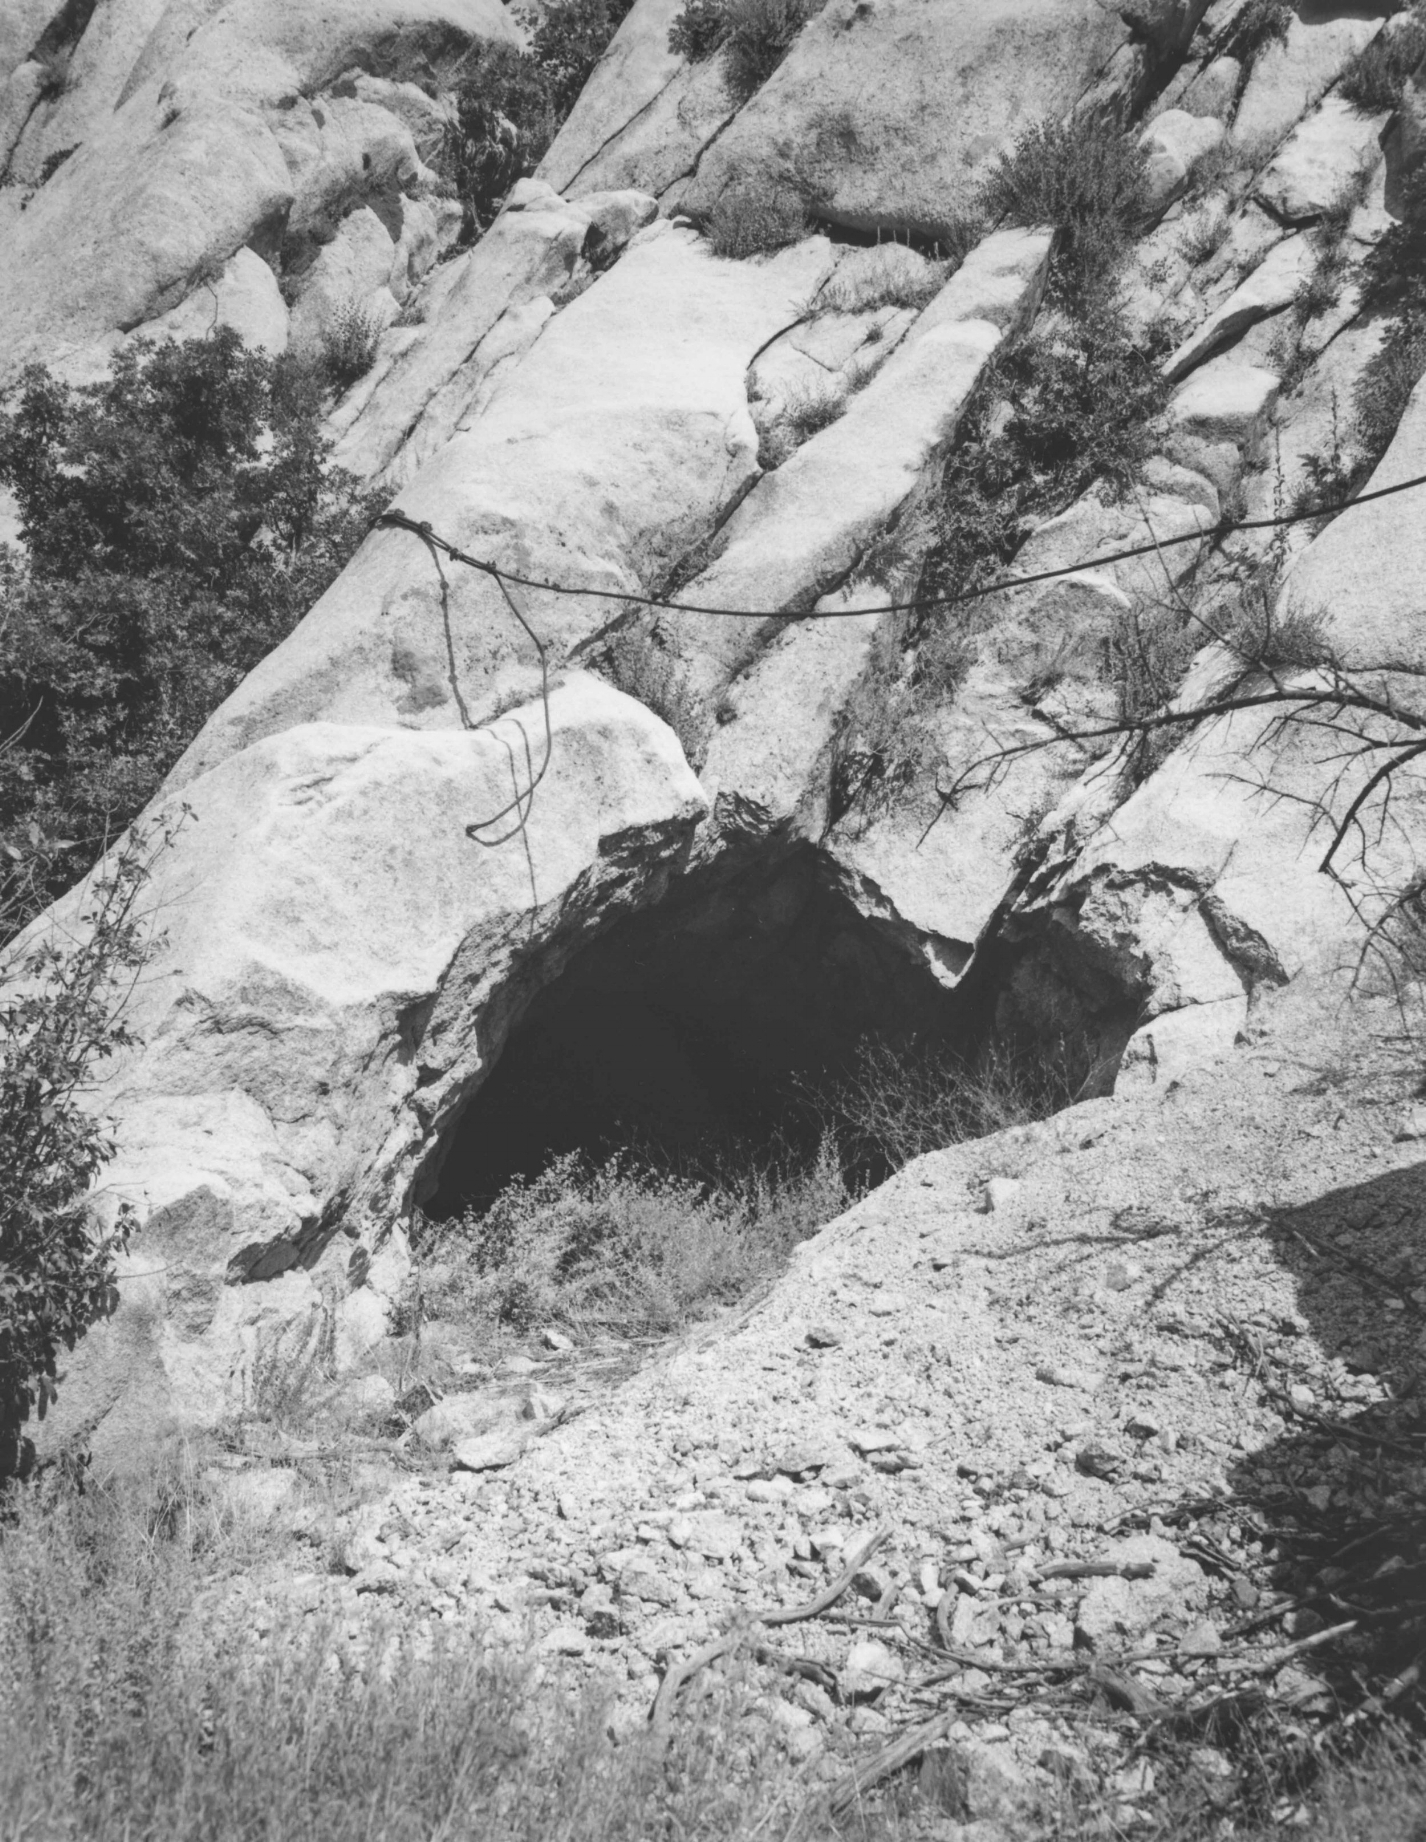   A storage cave in a granite cliff at the site of the Upper LDS Temple Granite Quarry in Little Cottonwood Canyon. For 40 years, the church quarried granite to build the walls of the Salt Lake Temple. It took three to four days to carry the stone th